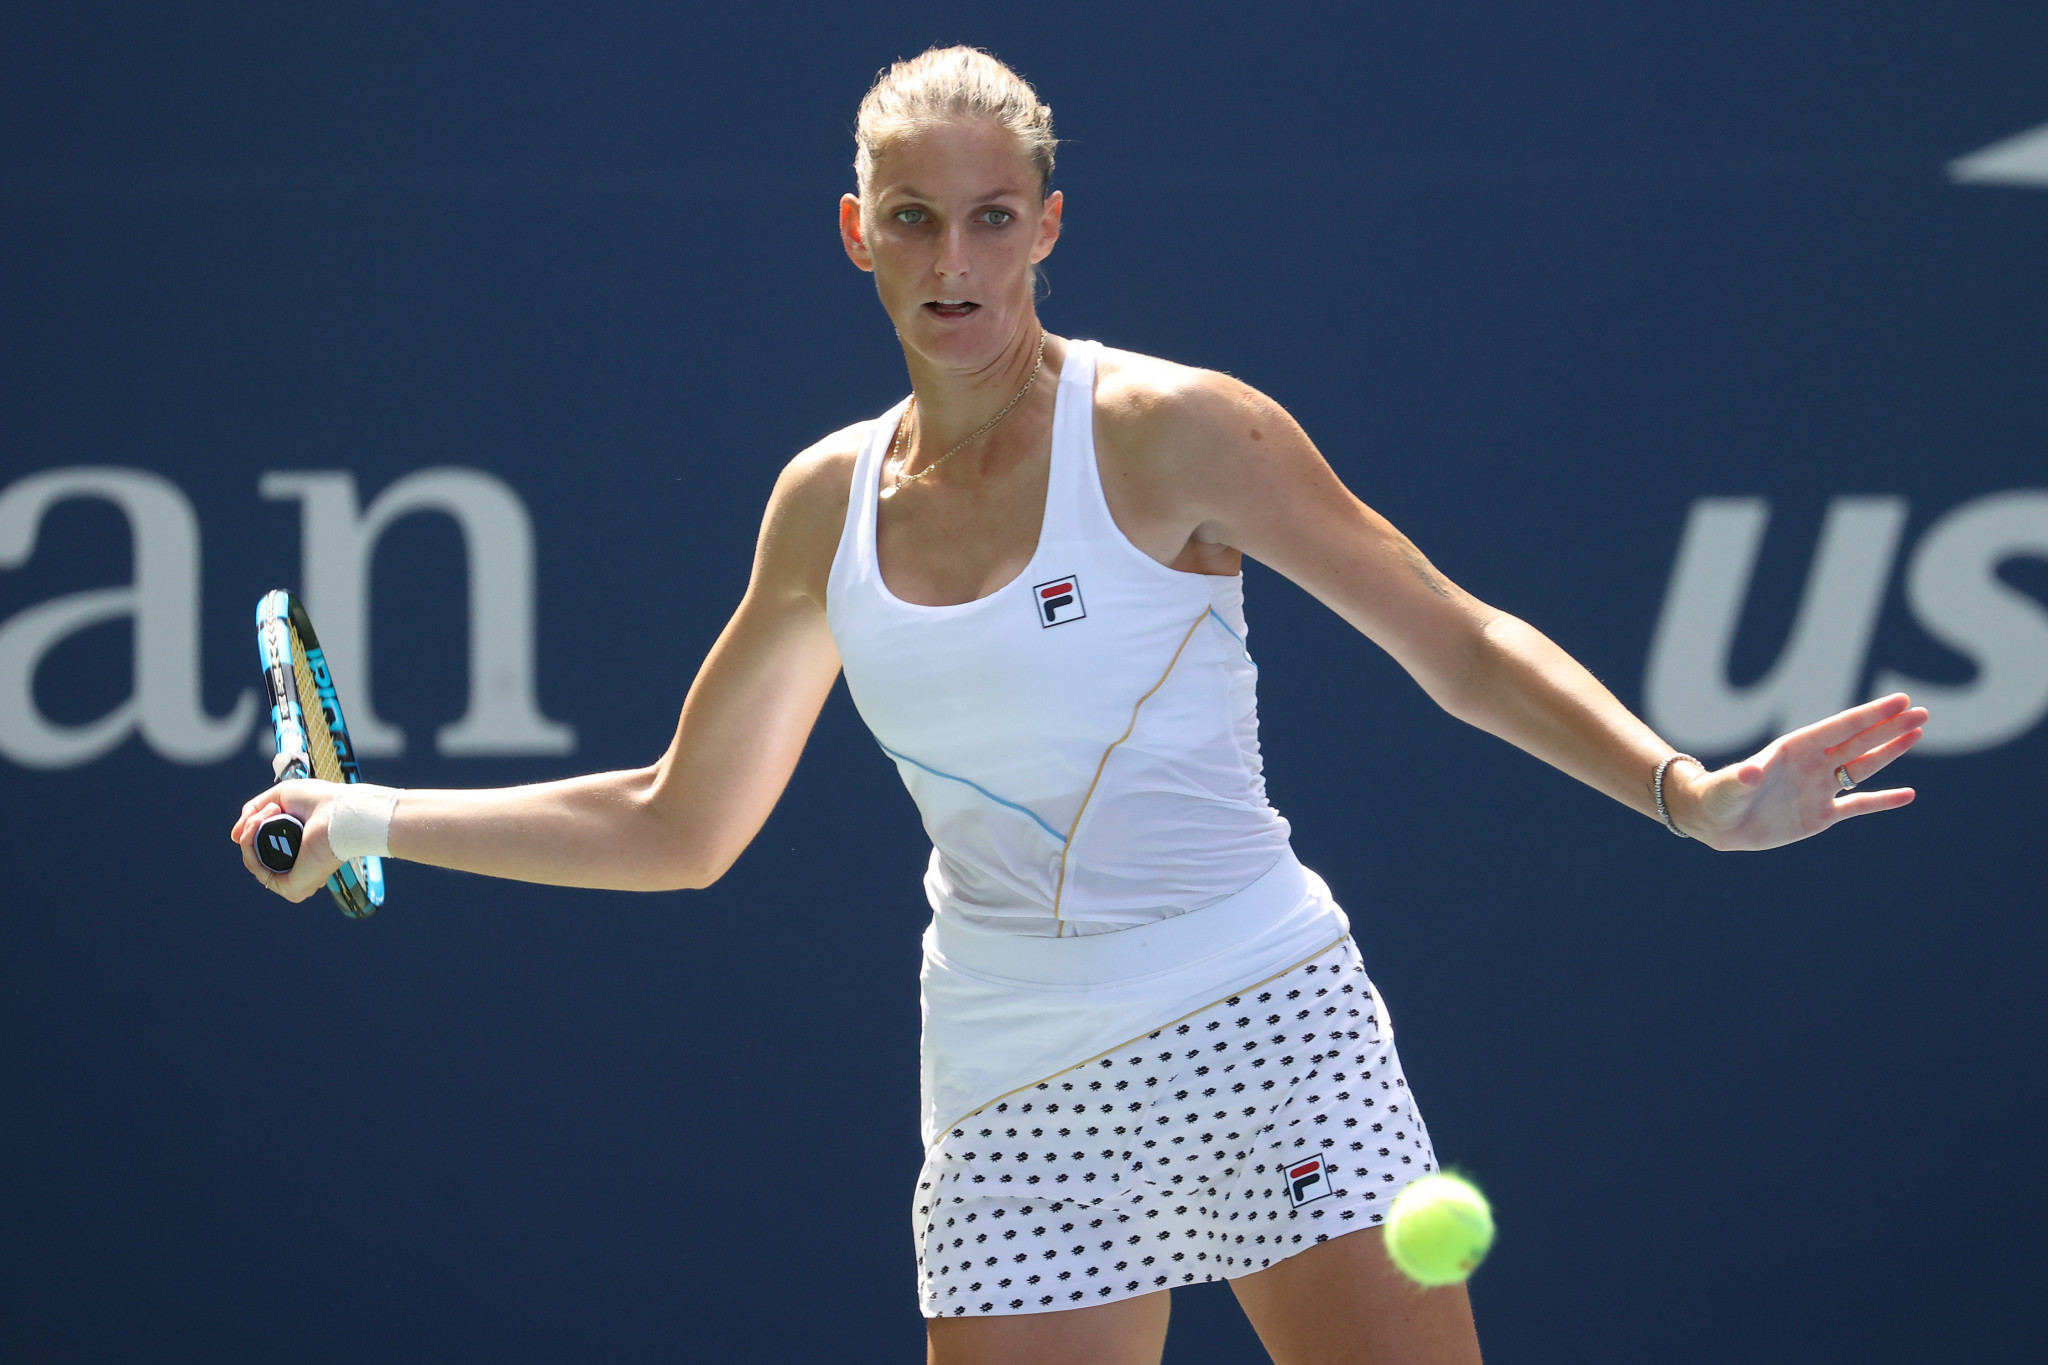 Karolina Plíšková of the Czech Republic triumphed in straight sets on day two of the US Open in New York City ©Getty Images